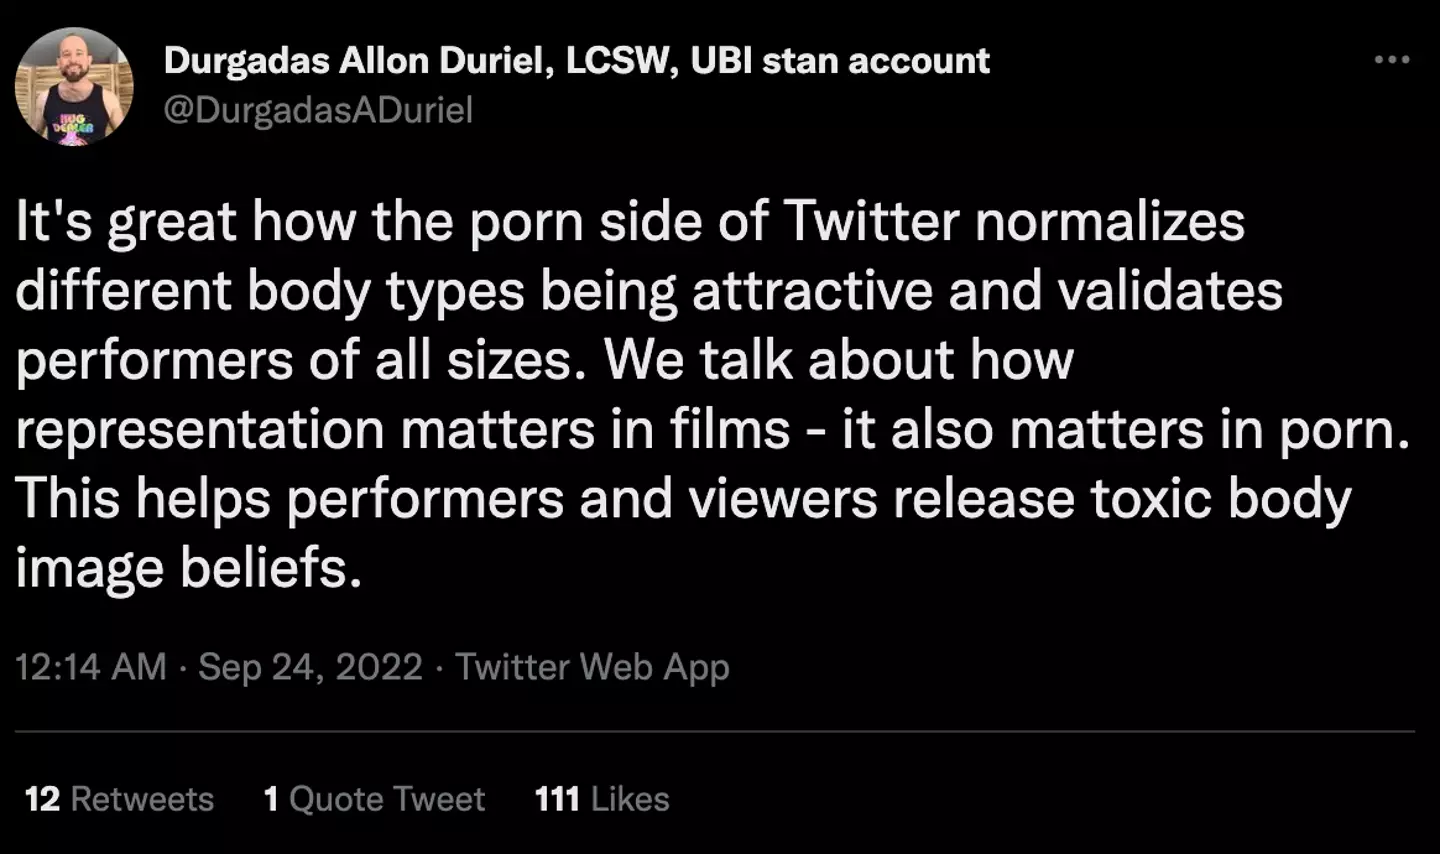 However, Dee argues representation is getting better and that labelling and fetishisation is a reflection of society's desires not the views of the adult film industry itself.